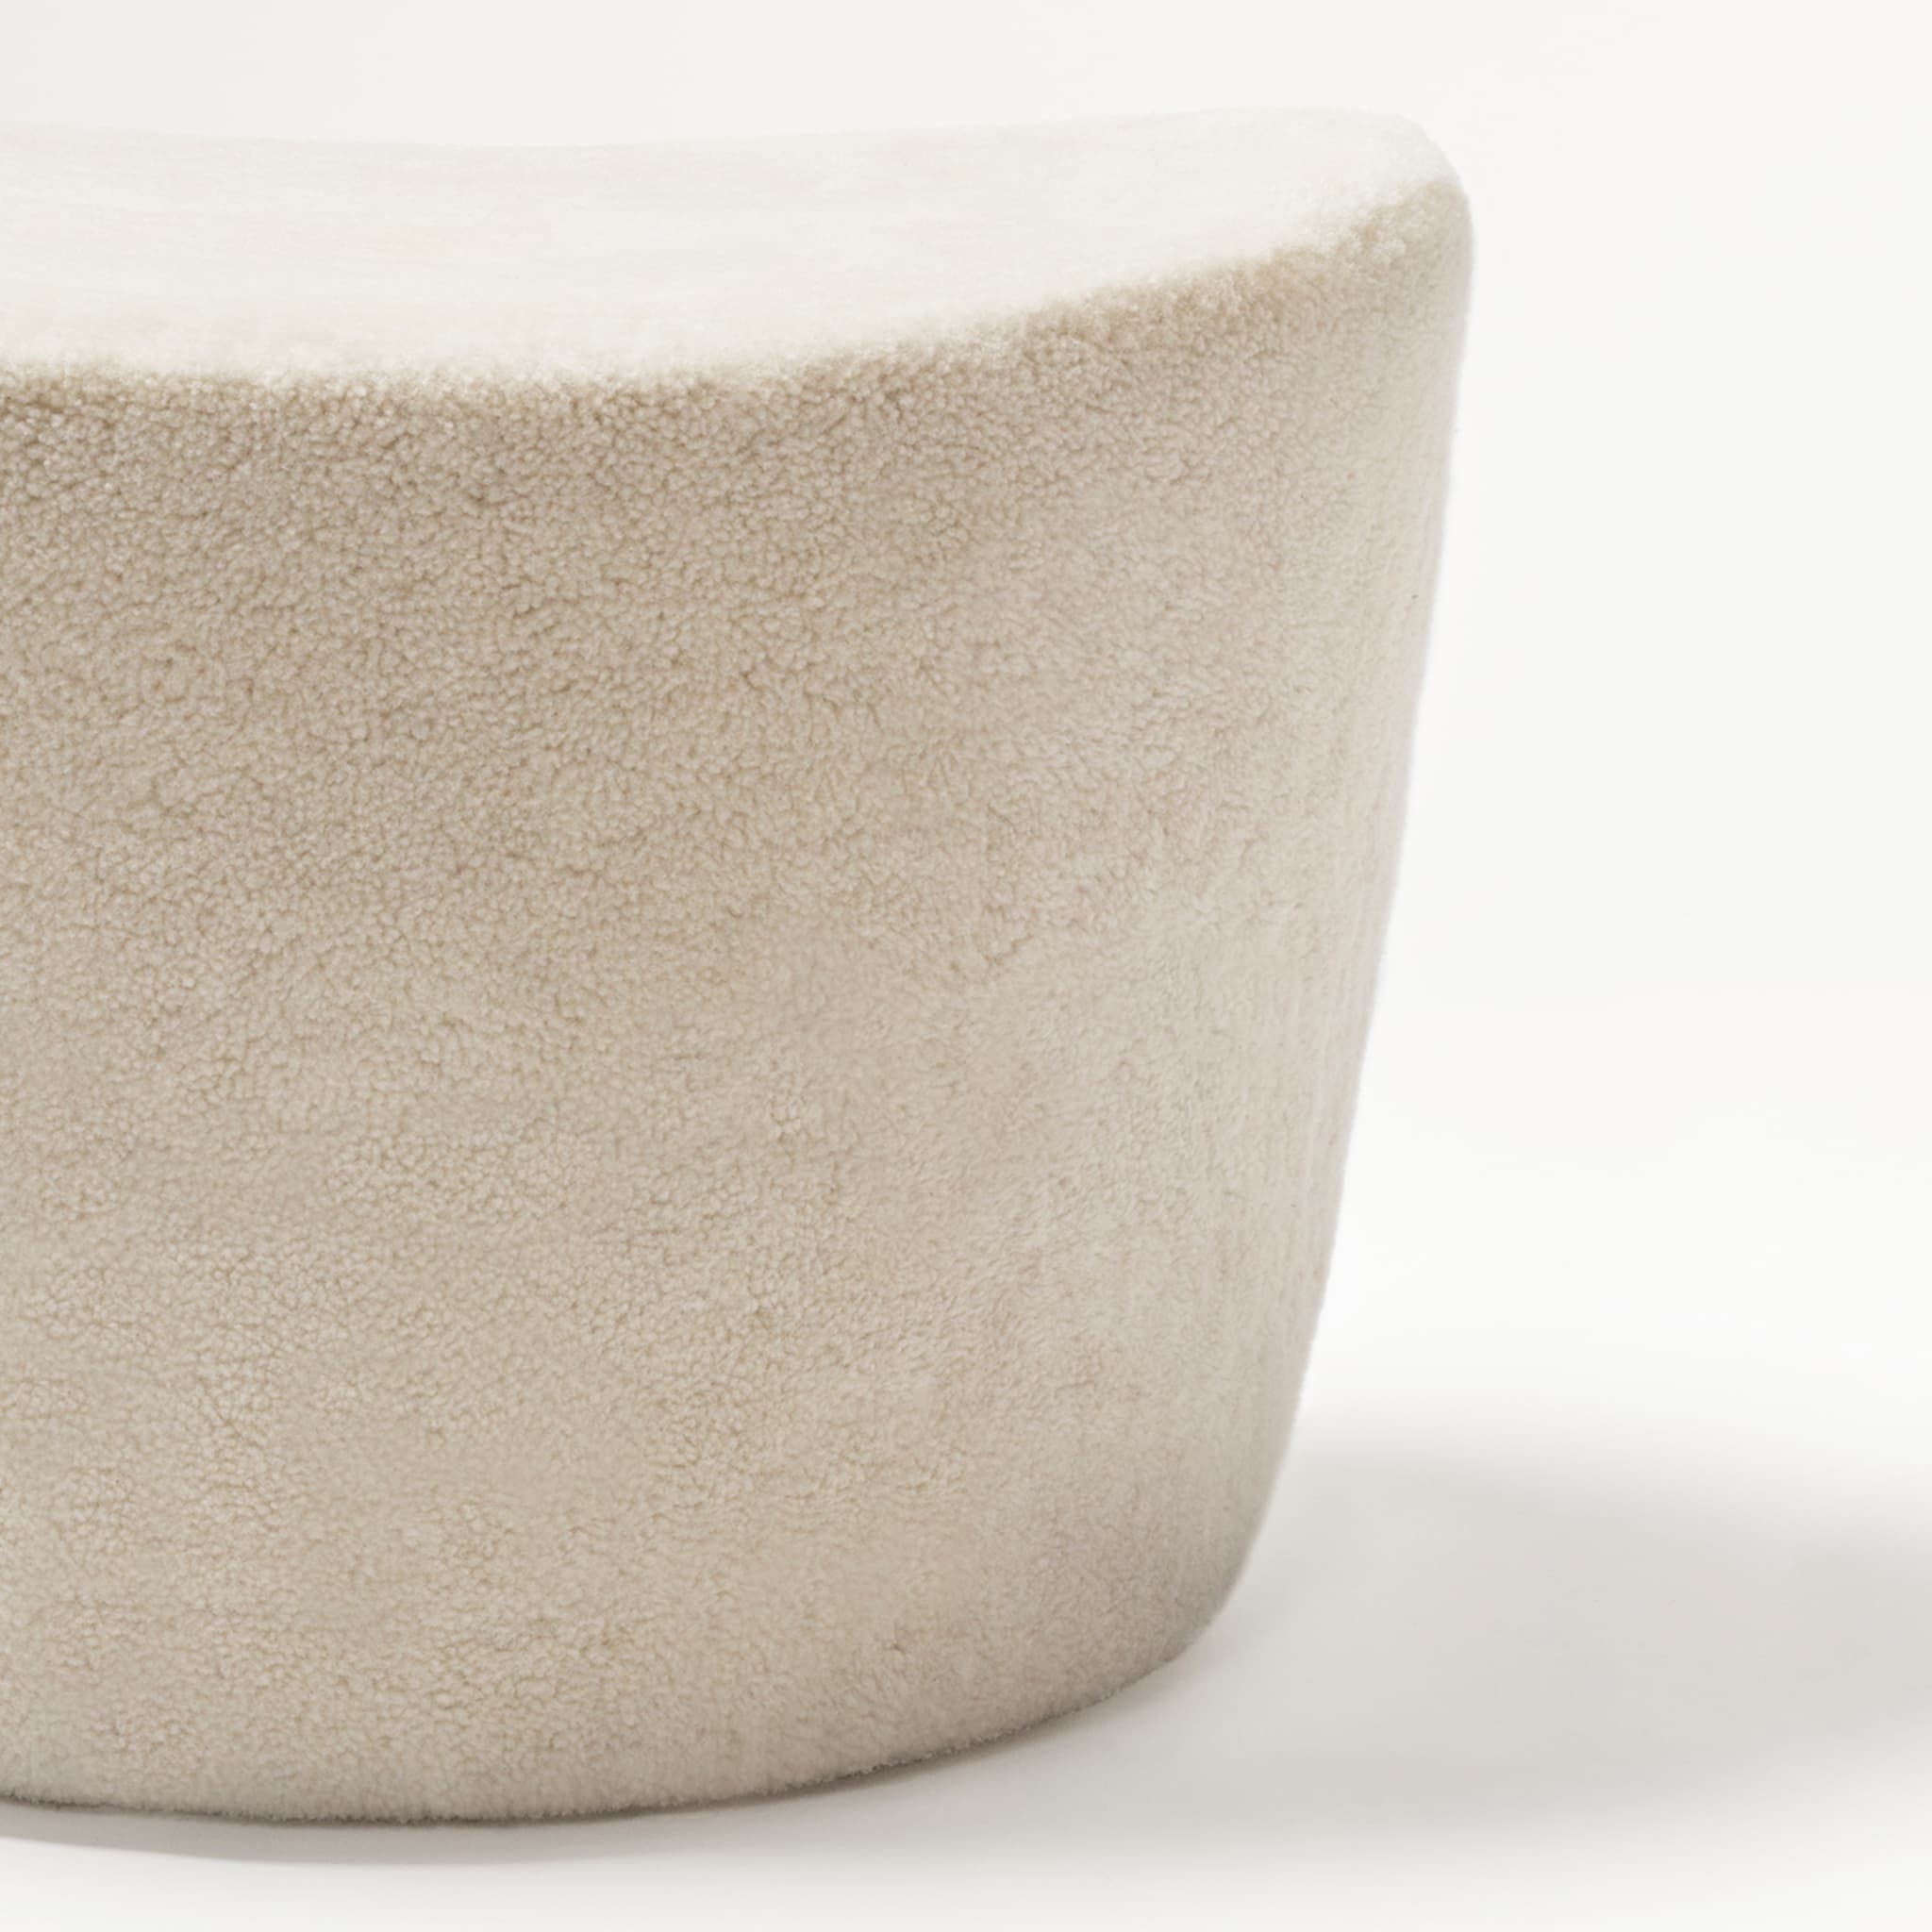 Persues Leather Pouf Shearling - Alternative view 1